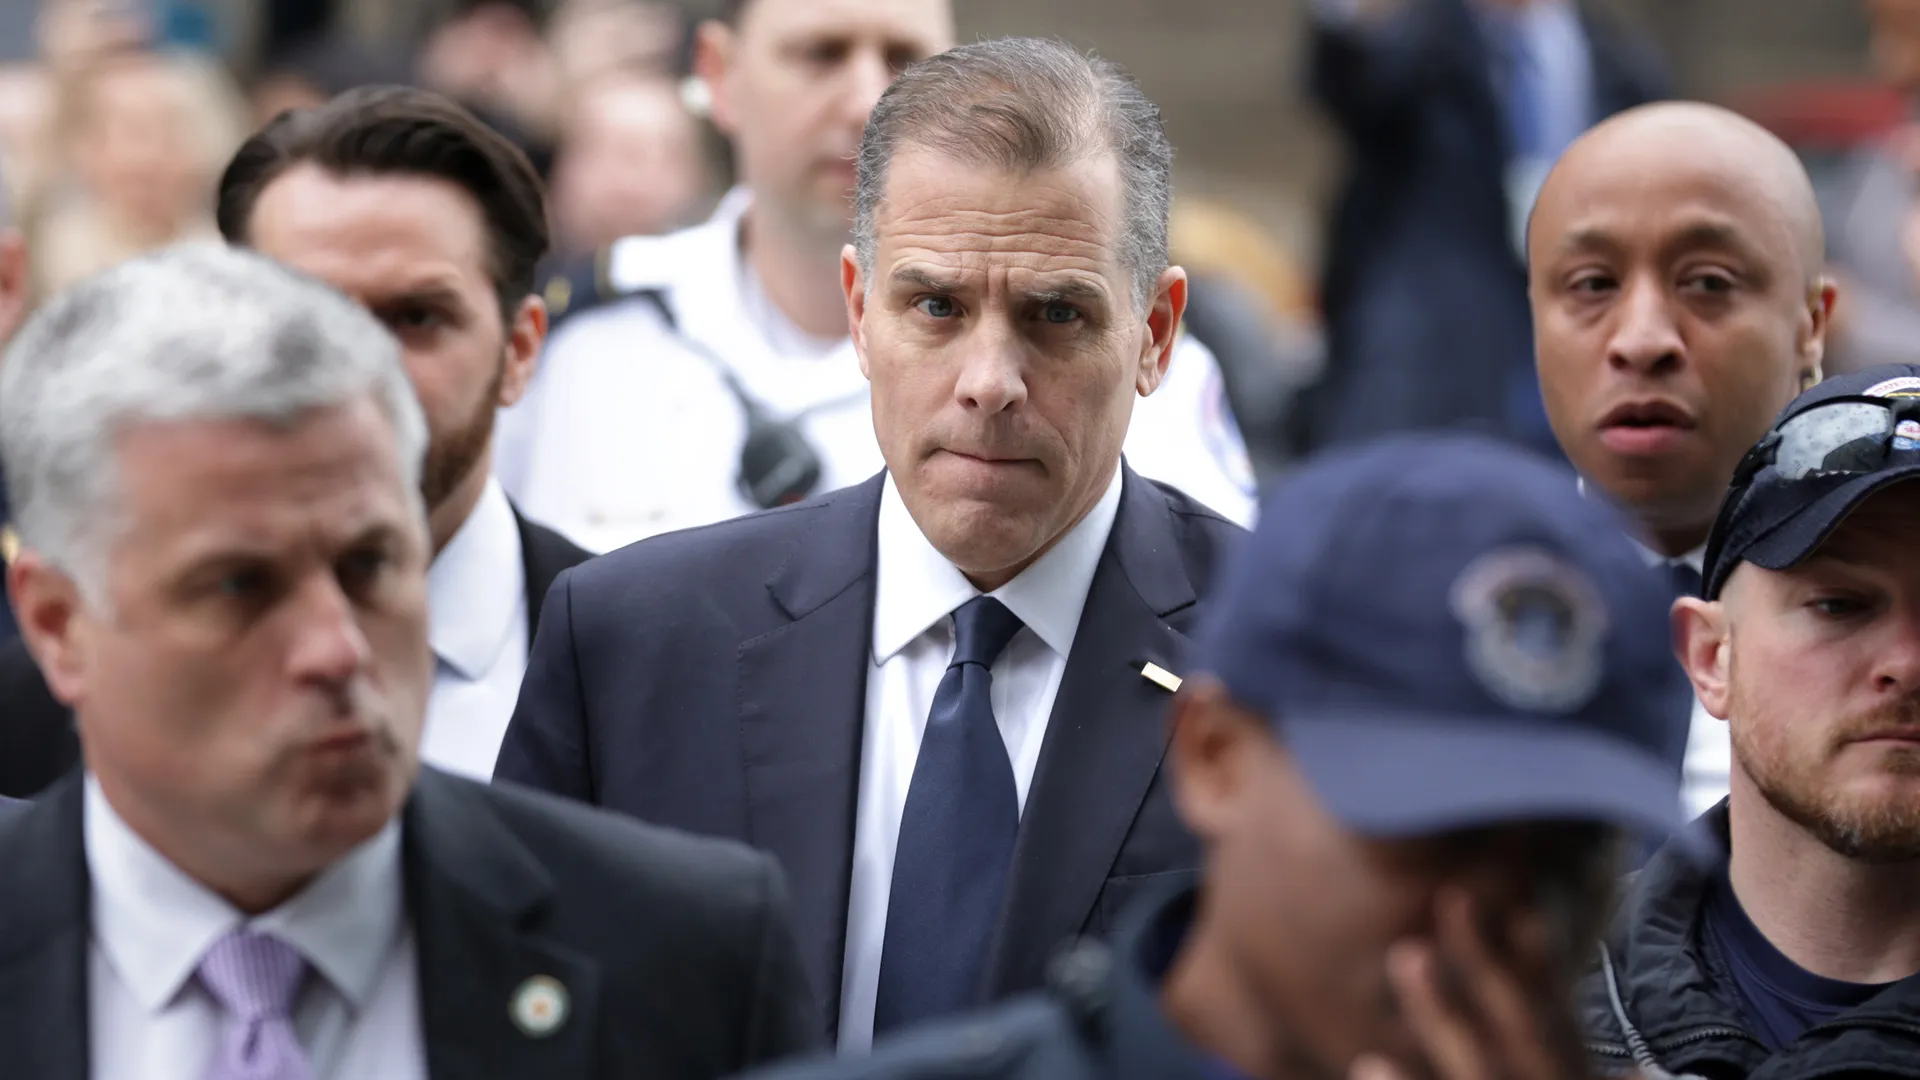 Committee probes Hunter Biden's business ties during father's vice presidency (Credits: Axios)